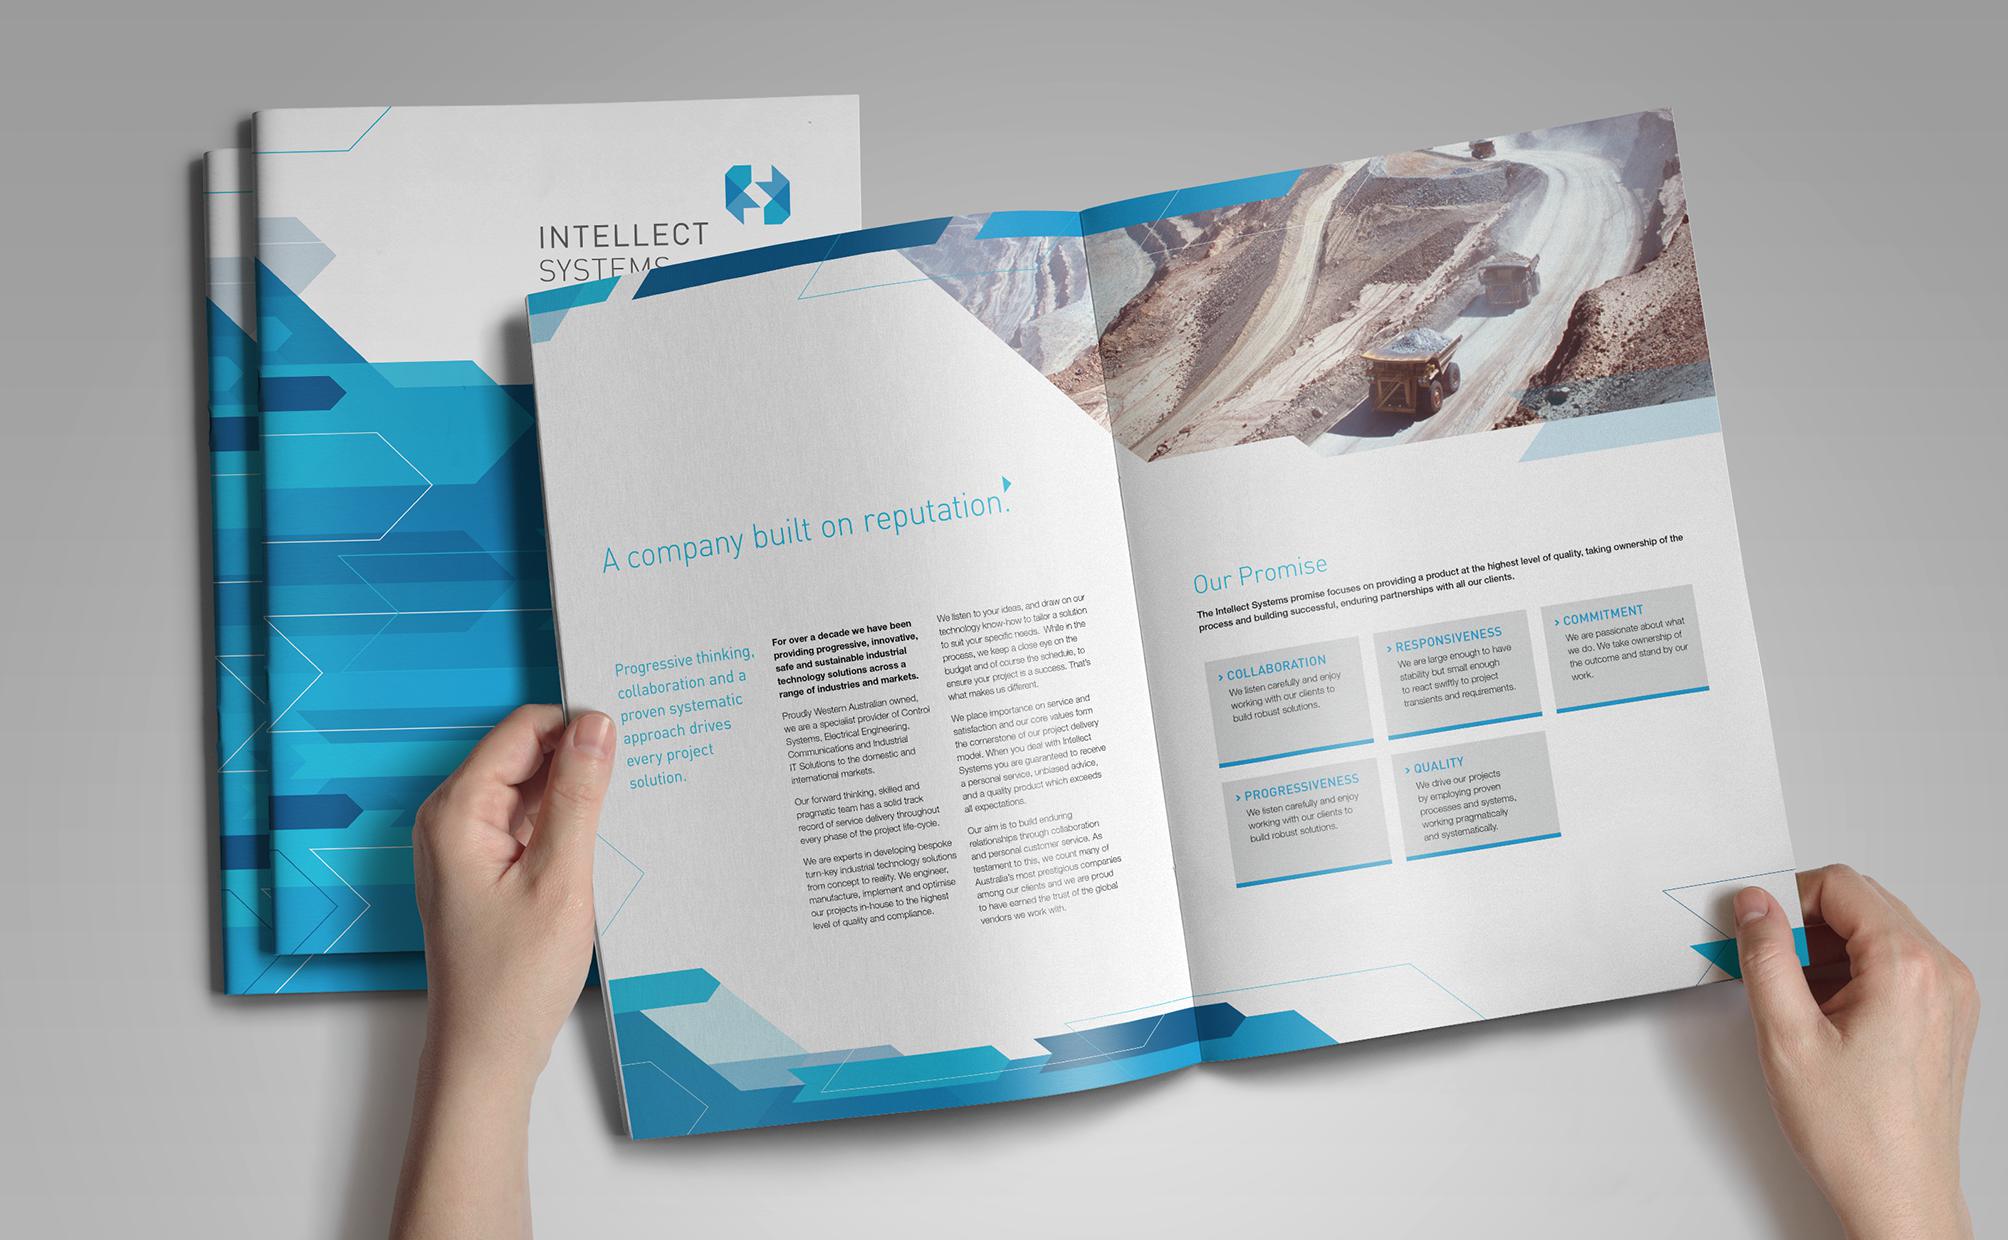 Intellect Systems - Capability statement brochure design